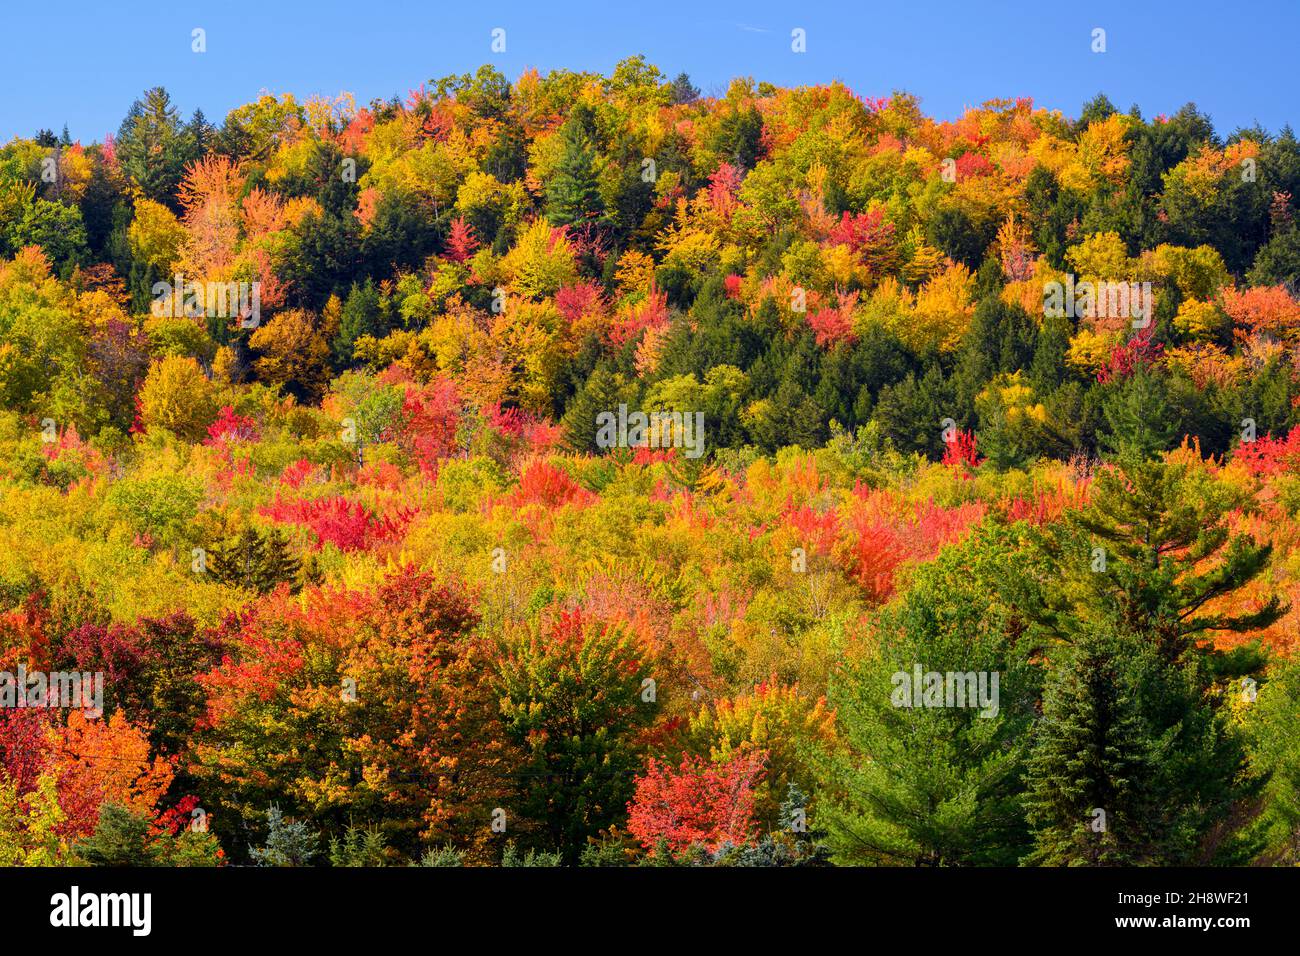 Autumn foliage in the deciduous forest on New England hillsides, White Mountain National Forest, New Hampshire, USA Stock Photo